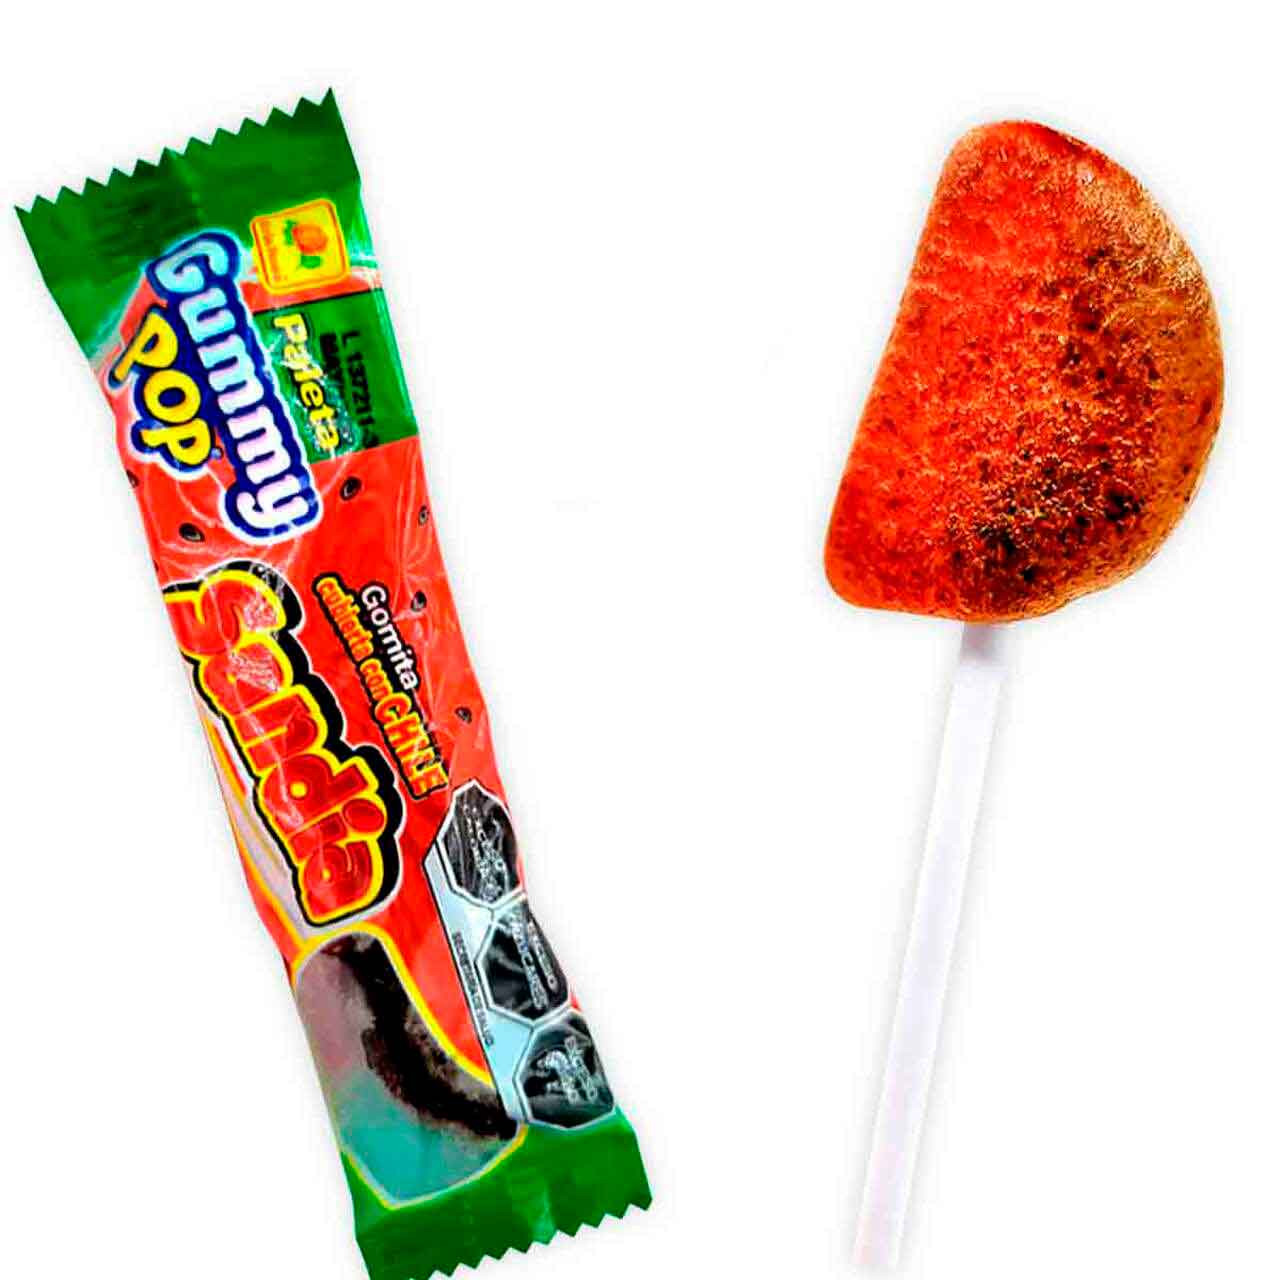 The "Gomita Pop" from the mexican brand "De la Rosa" are delicious gummies with a fruity watermelon flavor and a this layer of chili powder on it's surface. This delicious gummy lollipops come in the shape of a slice watermelon.